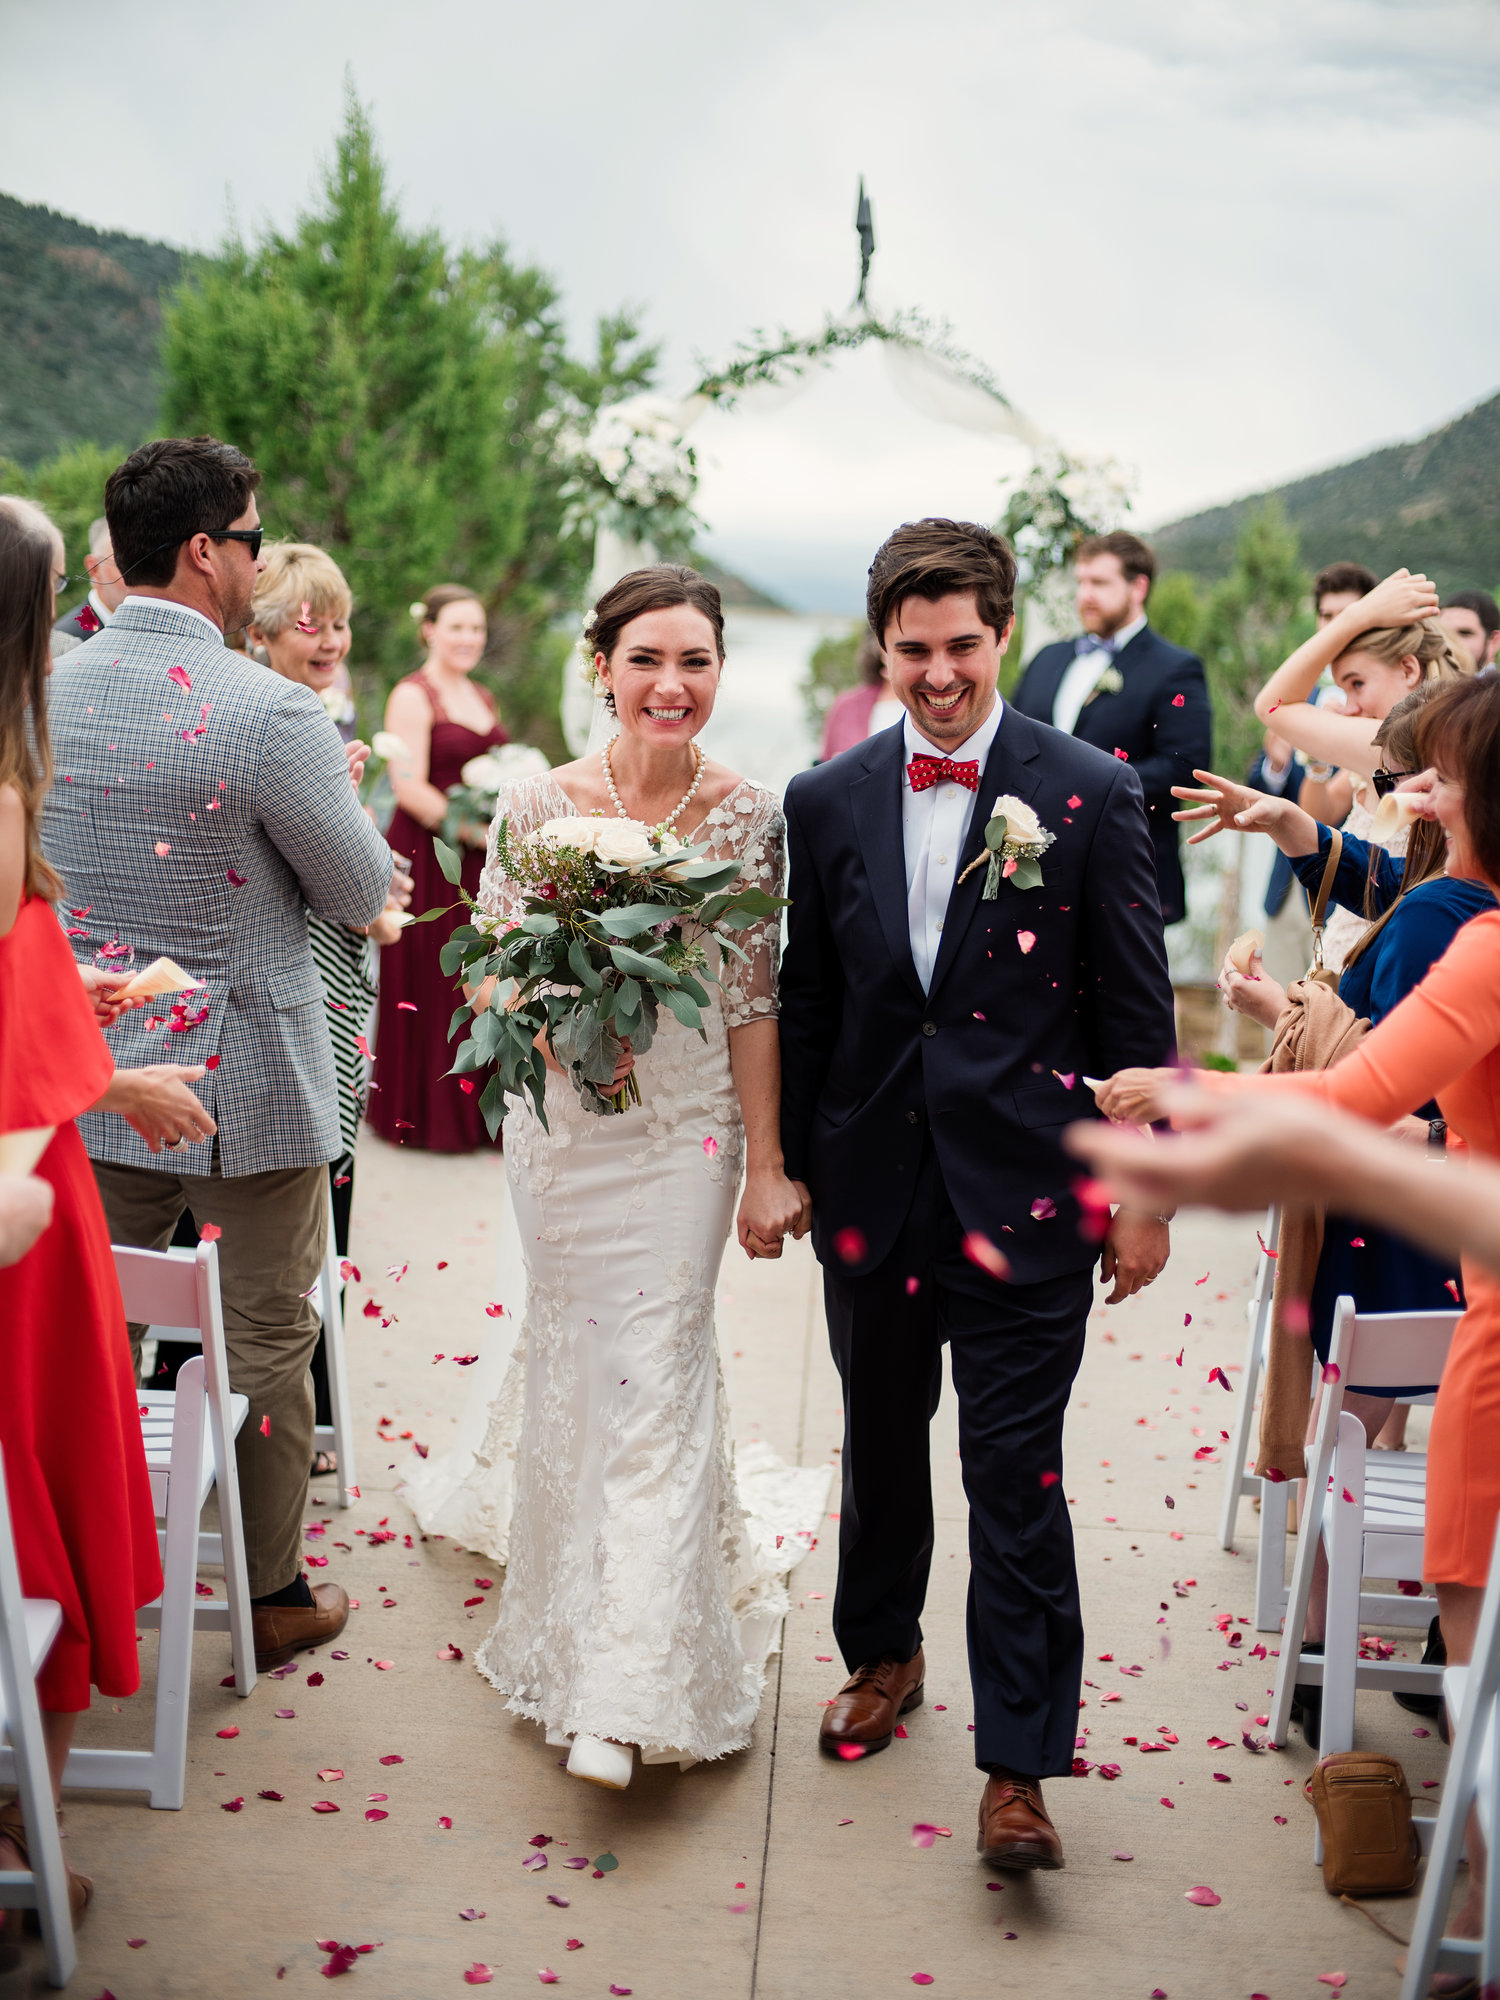 How to Get Wedding Insurance in Colorado | Vista View Events